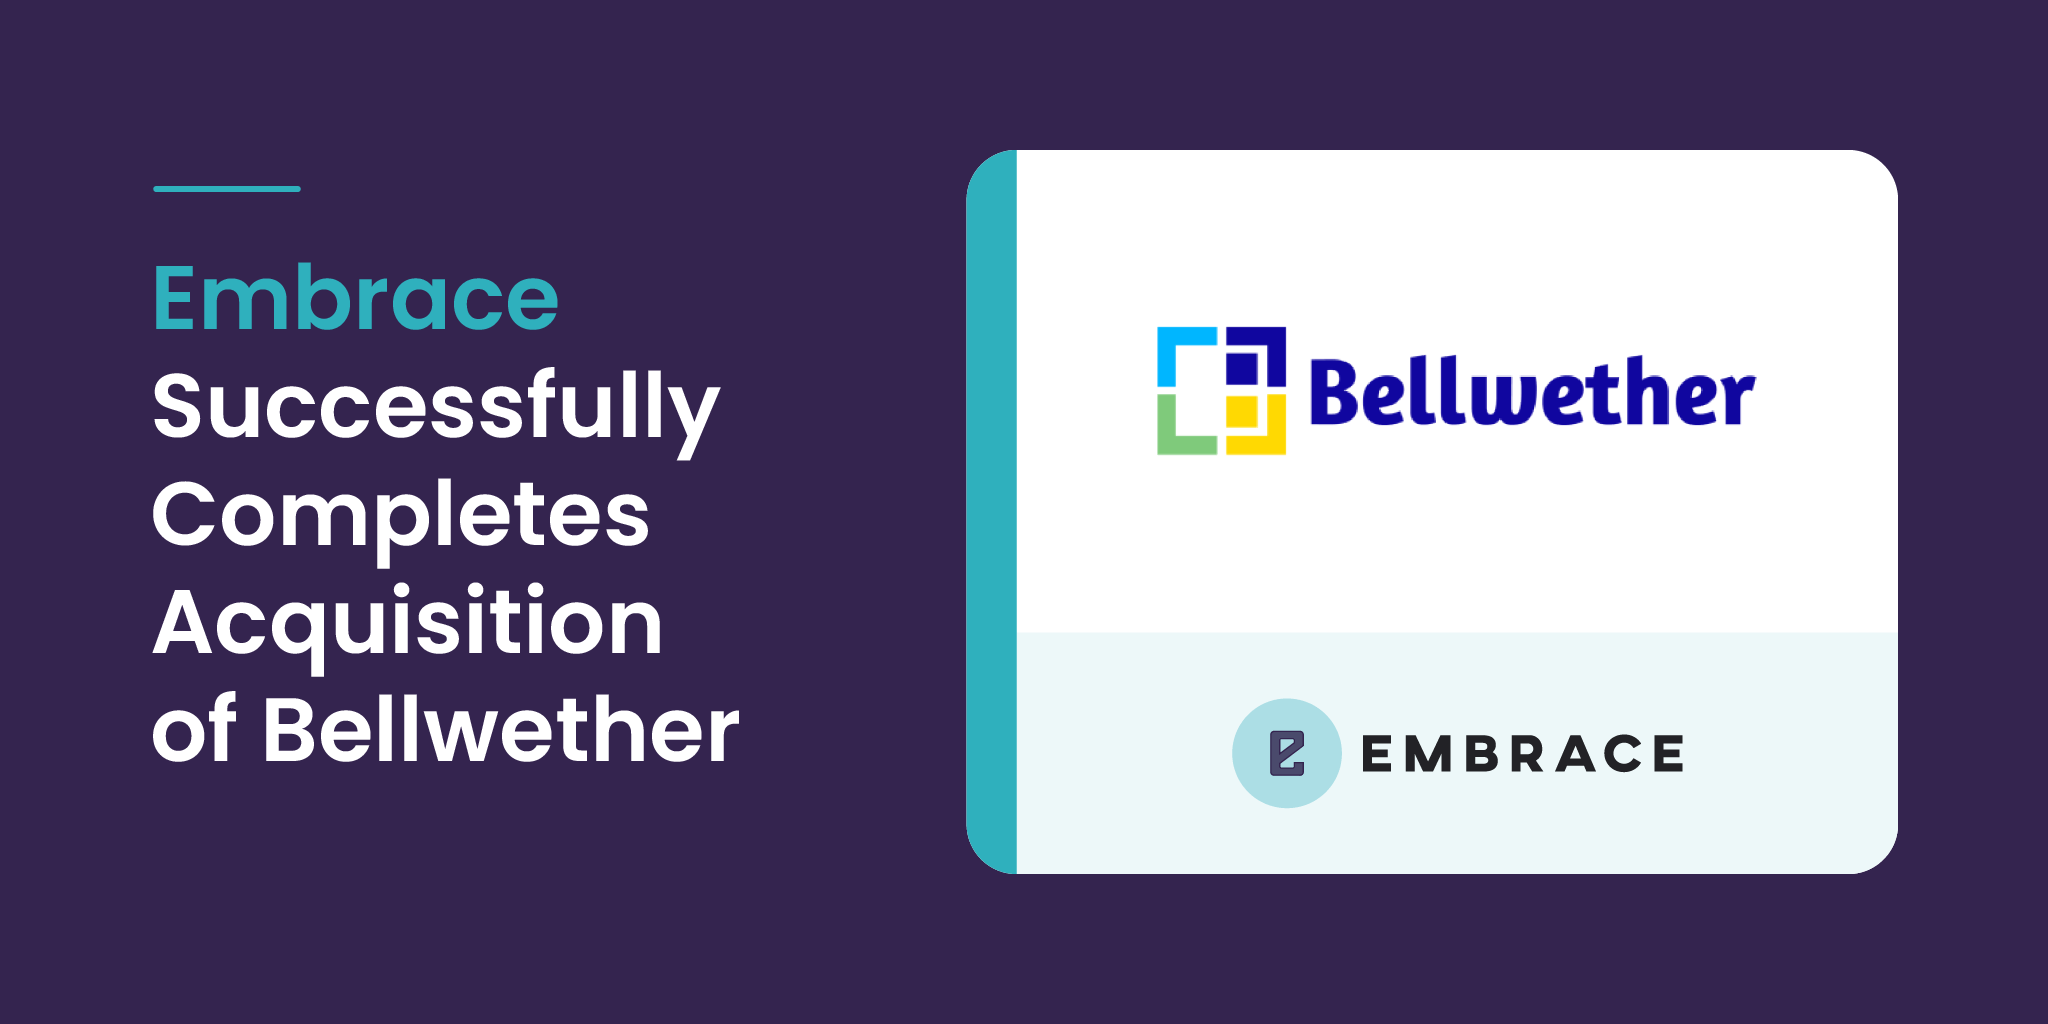 Embrace acquires Bellwether Software, a leading Procurement & Purchasing solution